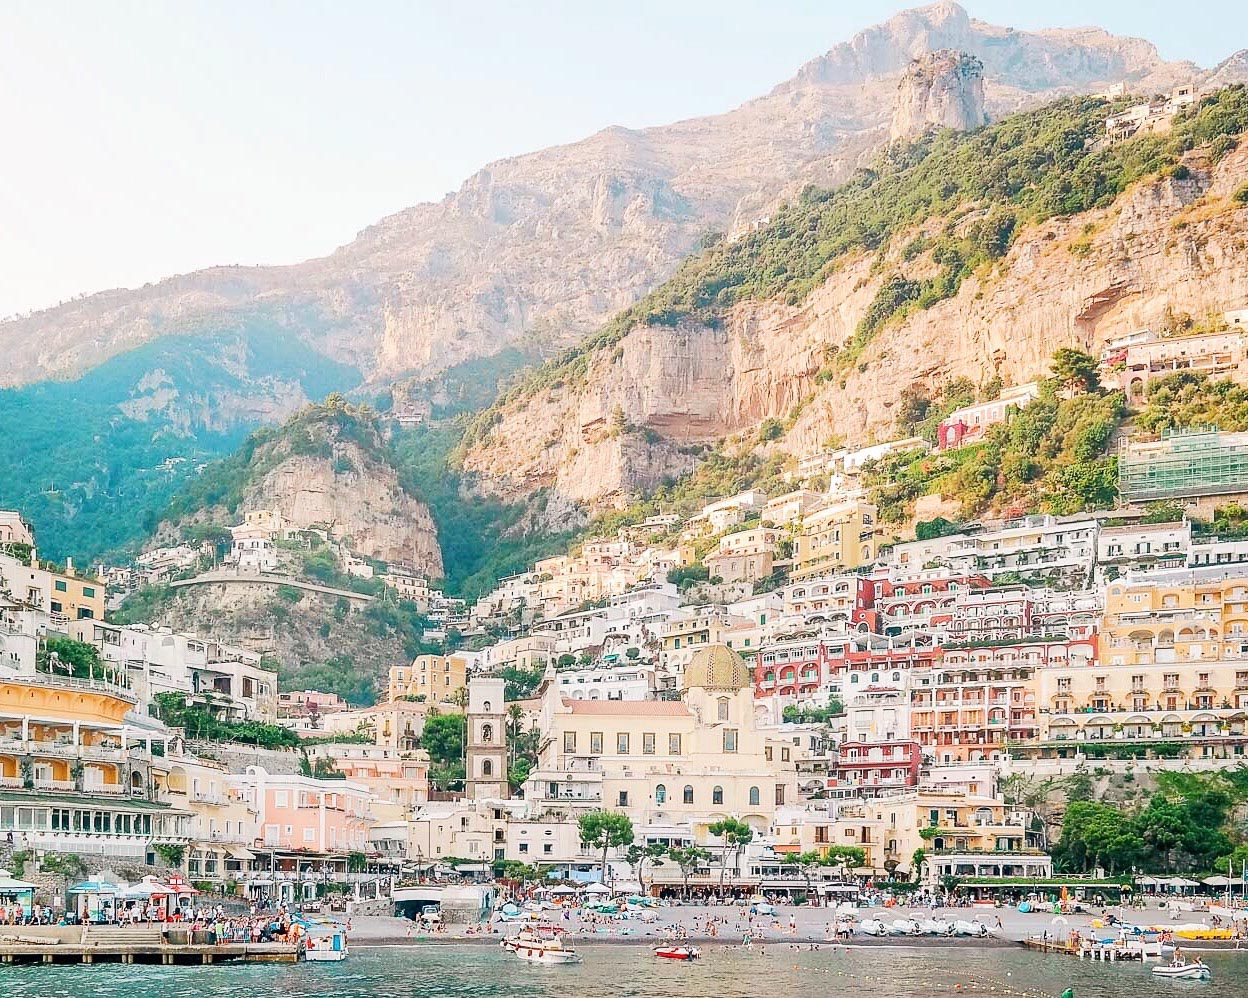 The view of Positano, Italy upon arrival by ferry. Positano travel guide